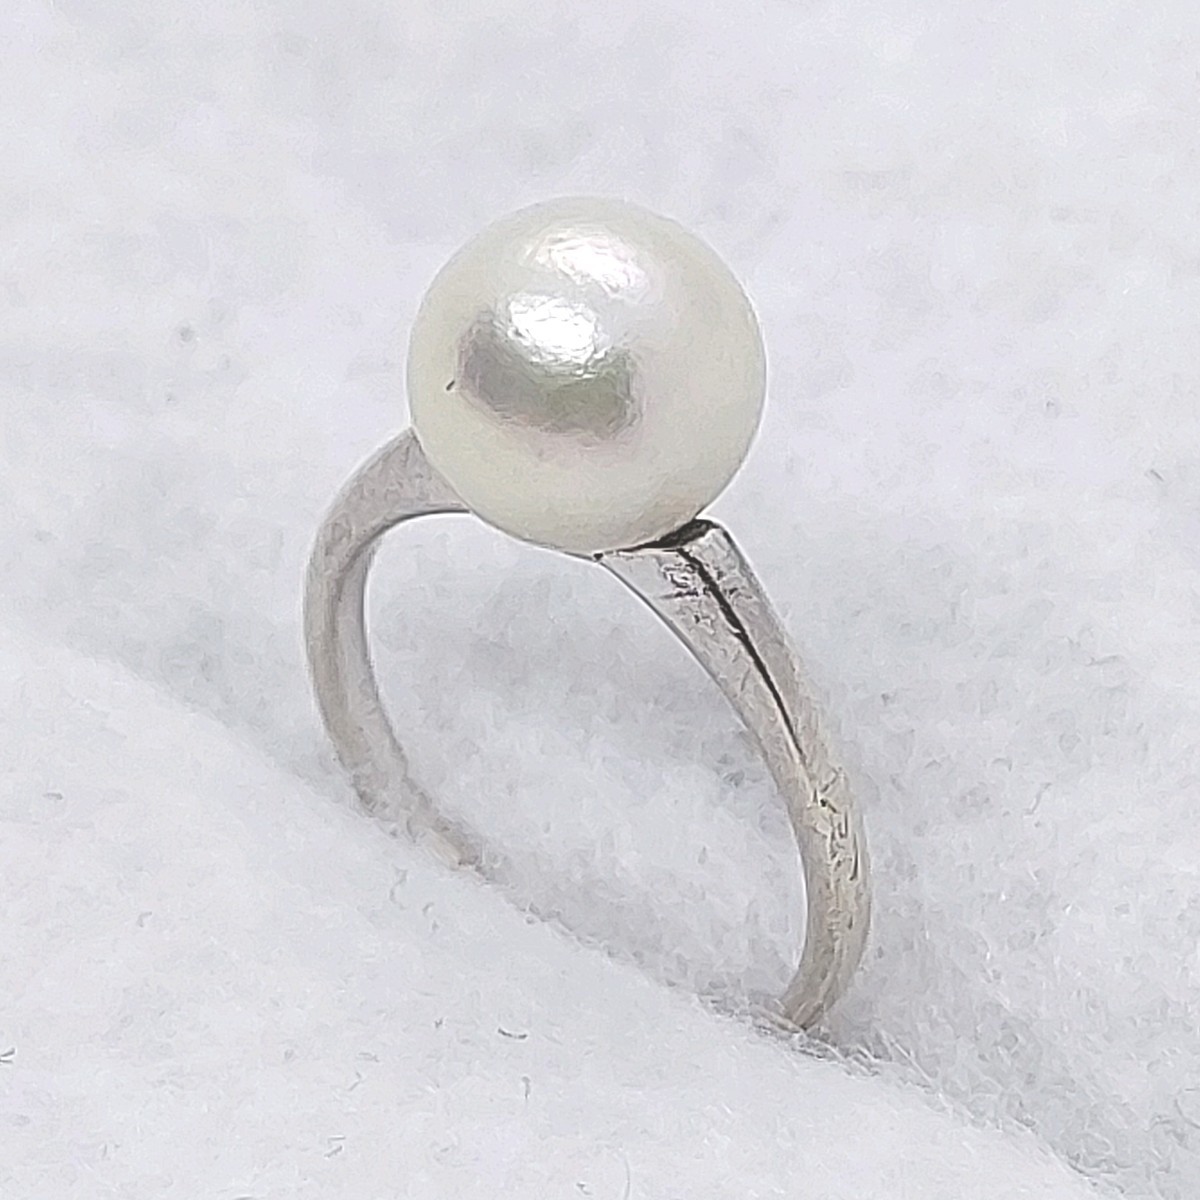  Mikimoto MIKIMOTO pearl approximately 7.3. approximately 1.5 number silver pin key ring ring SV silver 